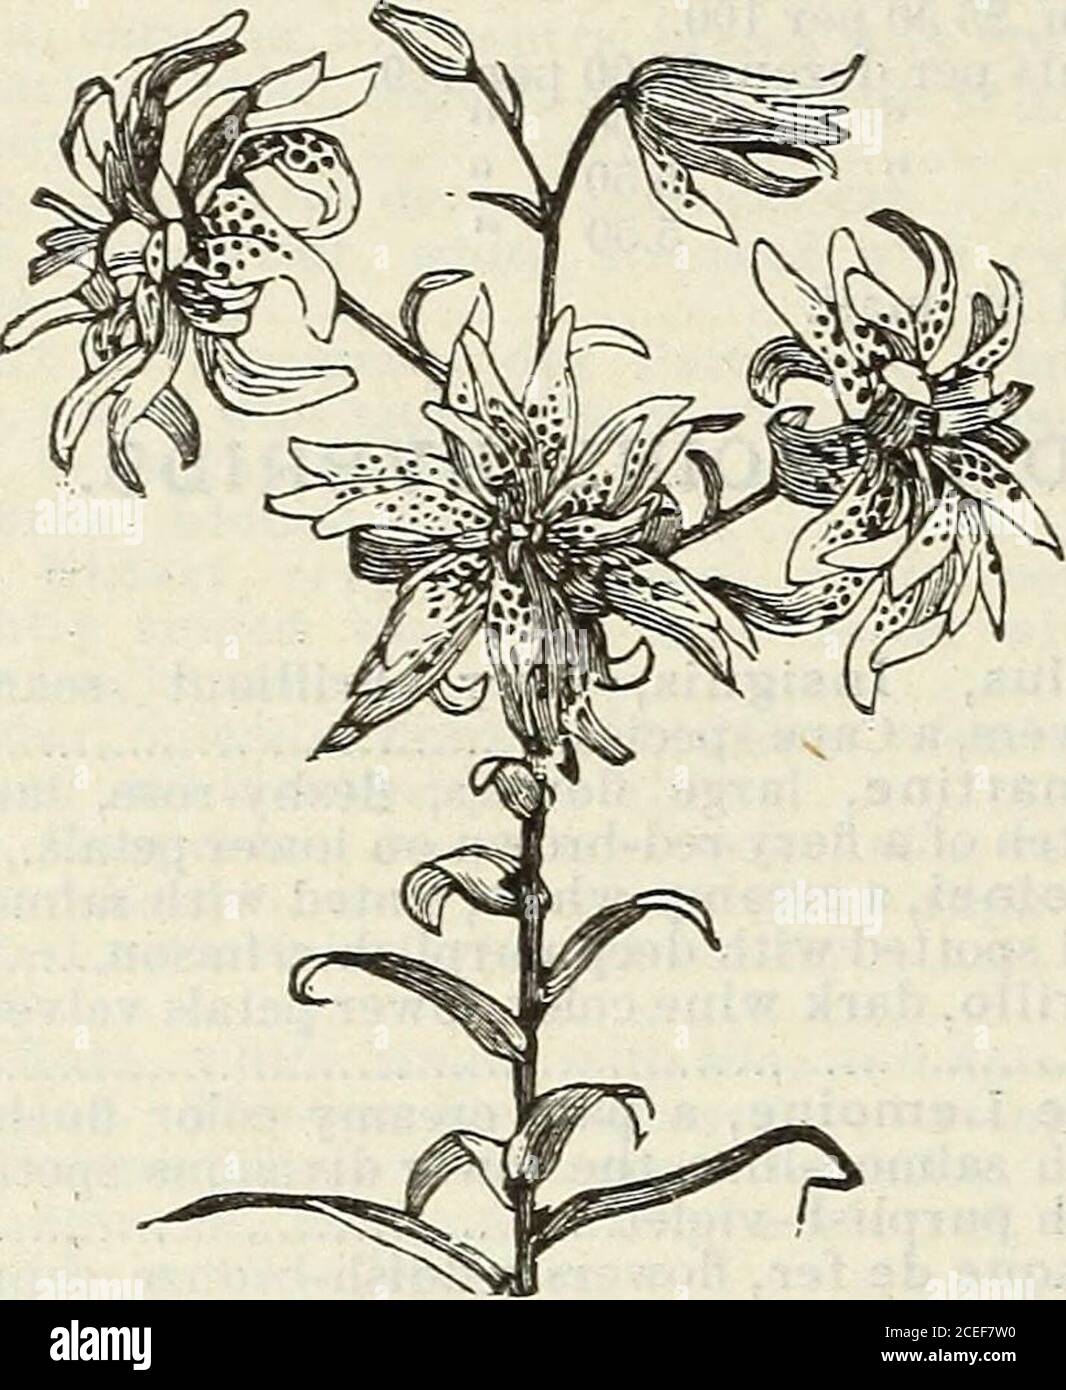 . John Saul's Washington nurseries catalogue of plants for the spring of 1888. 4 incheslong, fragrant and early blooming 75 62 JOHlIf SAULS DESCRIPTITE CATALOGUE Each.Lilium, Speciosum Punctatum, white, deli-cately spotttd with rose 50 Speciosum (Lancifoliuin) Album, white flow-ers 35 Melpomme, this fine variety is richer in colorthan any of the varieties of Speciosum 75. DOUBLE TIGER LILY. Rubrum, Japan Lily, stem two to three feethigh, color white, sutlussd with red, anddotted with bright crimson on the innersurface 25 Macranthum, a variety of Rubrum, flowerslarge and highly colored 40 Stock Photo